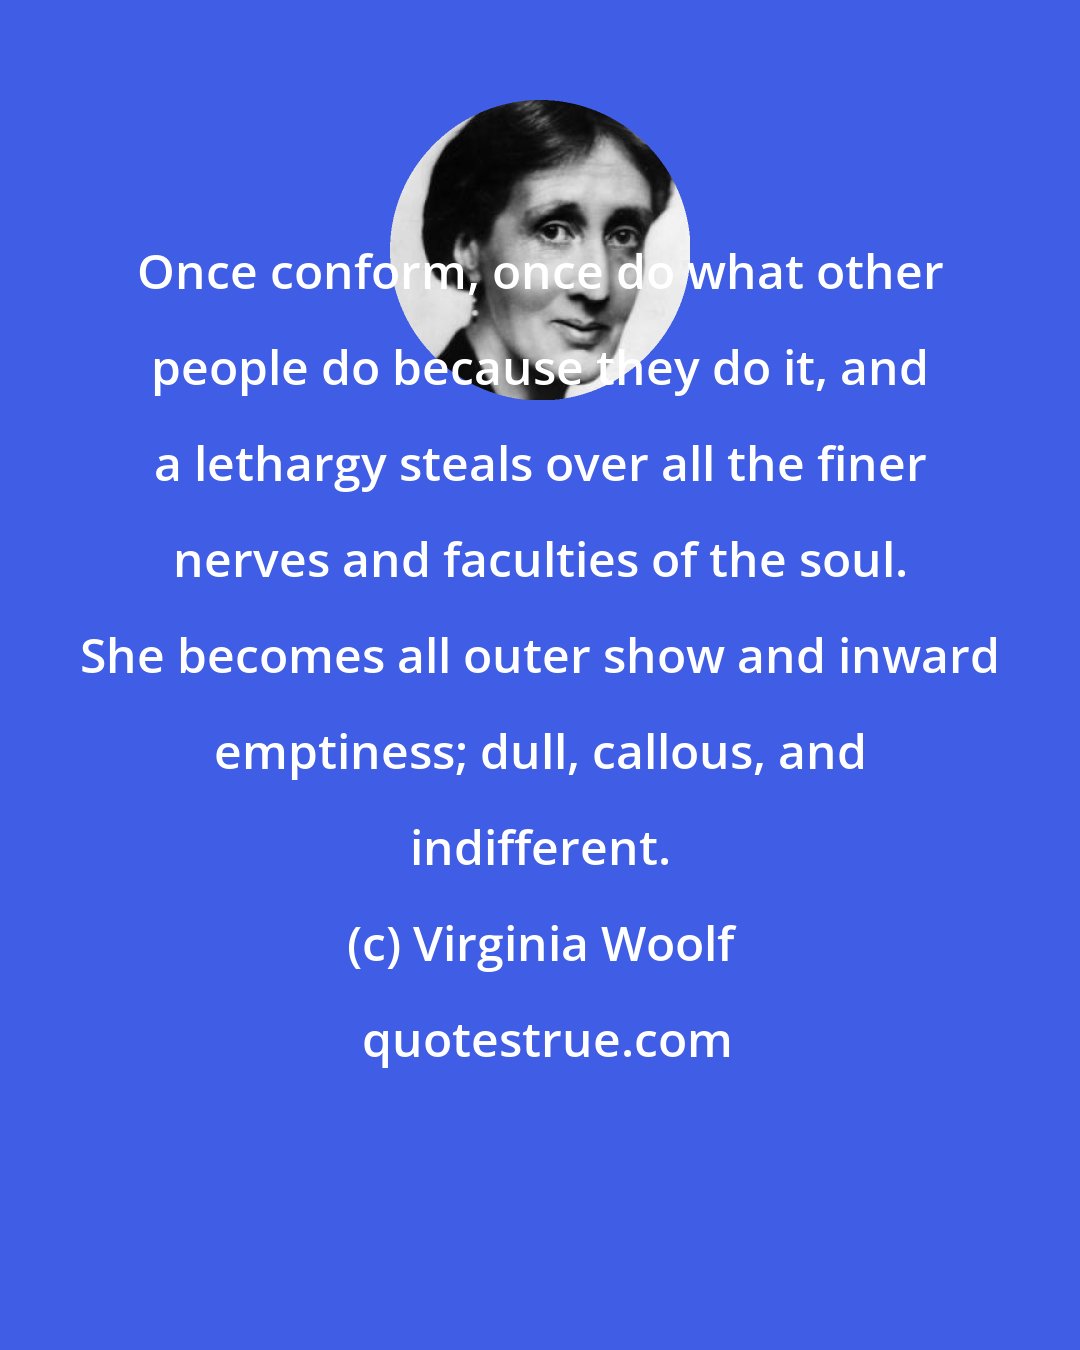 Virginia Woolf: Once conform, once do what other people do because they do it, and a lethargy steals over all the finer nerves and faculties of the soul. She becomes all outer show and inward emptiness; dull, callous, and indifferent.